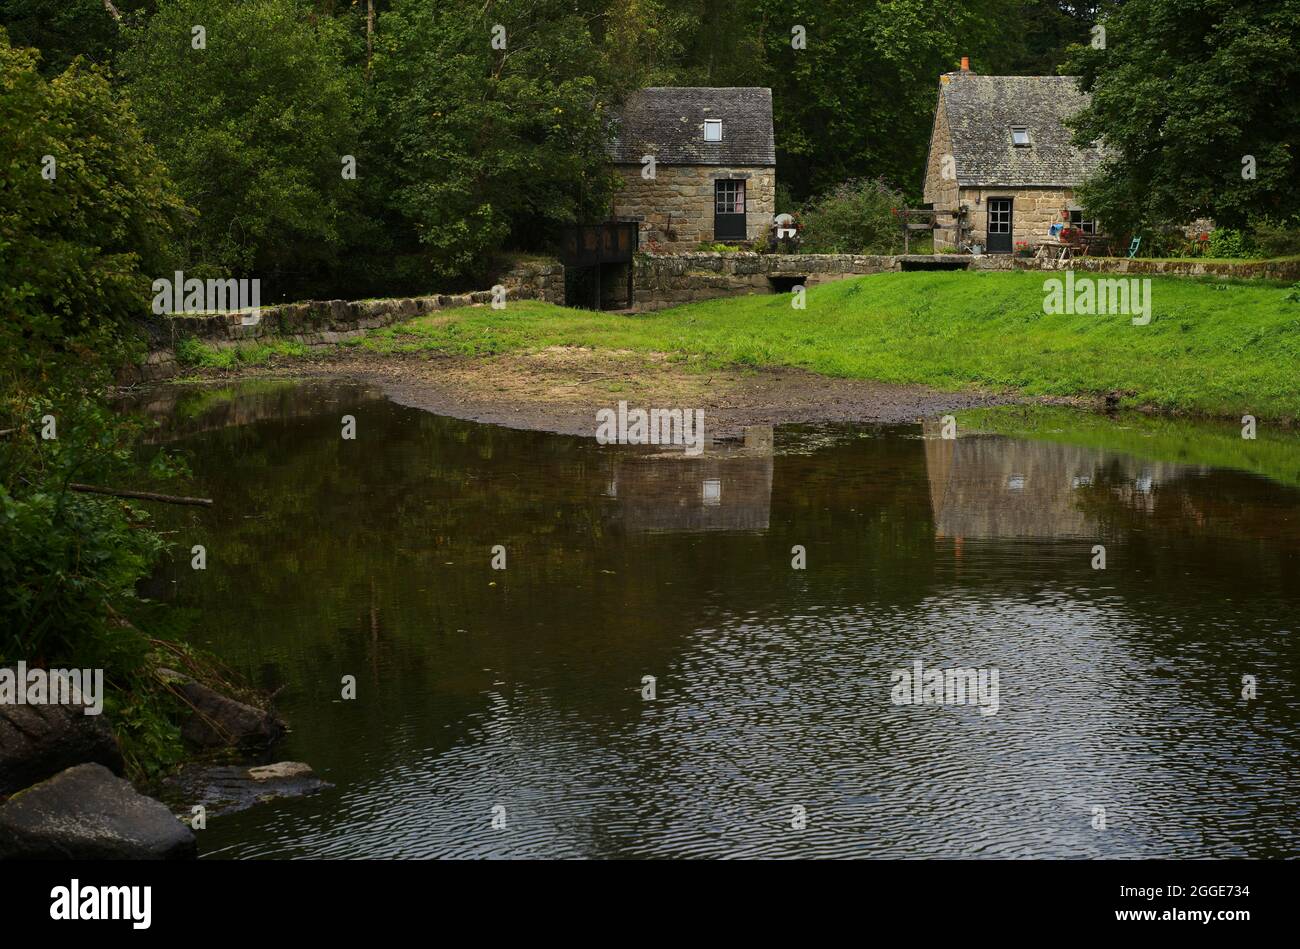 Mill, Moulin, Milin Traou Morvan, Vallee du Le Leguer, River of the Migratory Fish, Tonquedec, Cotes-d'Armor, Brittany, France Stock Photo